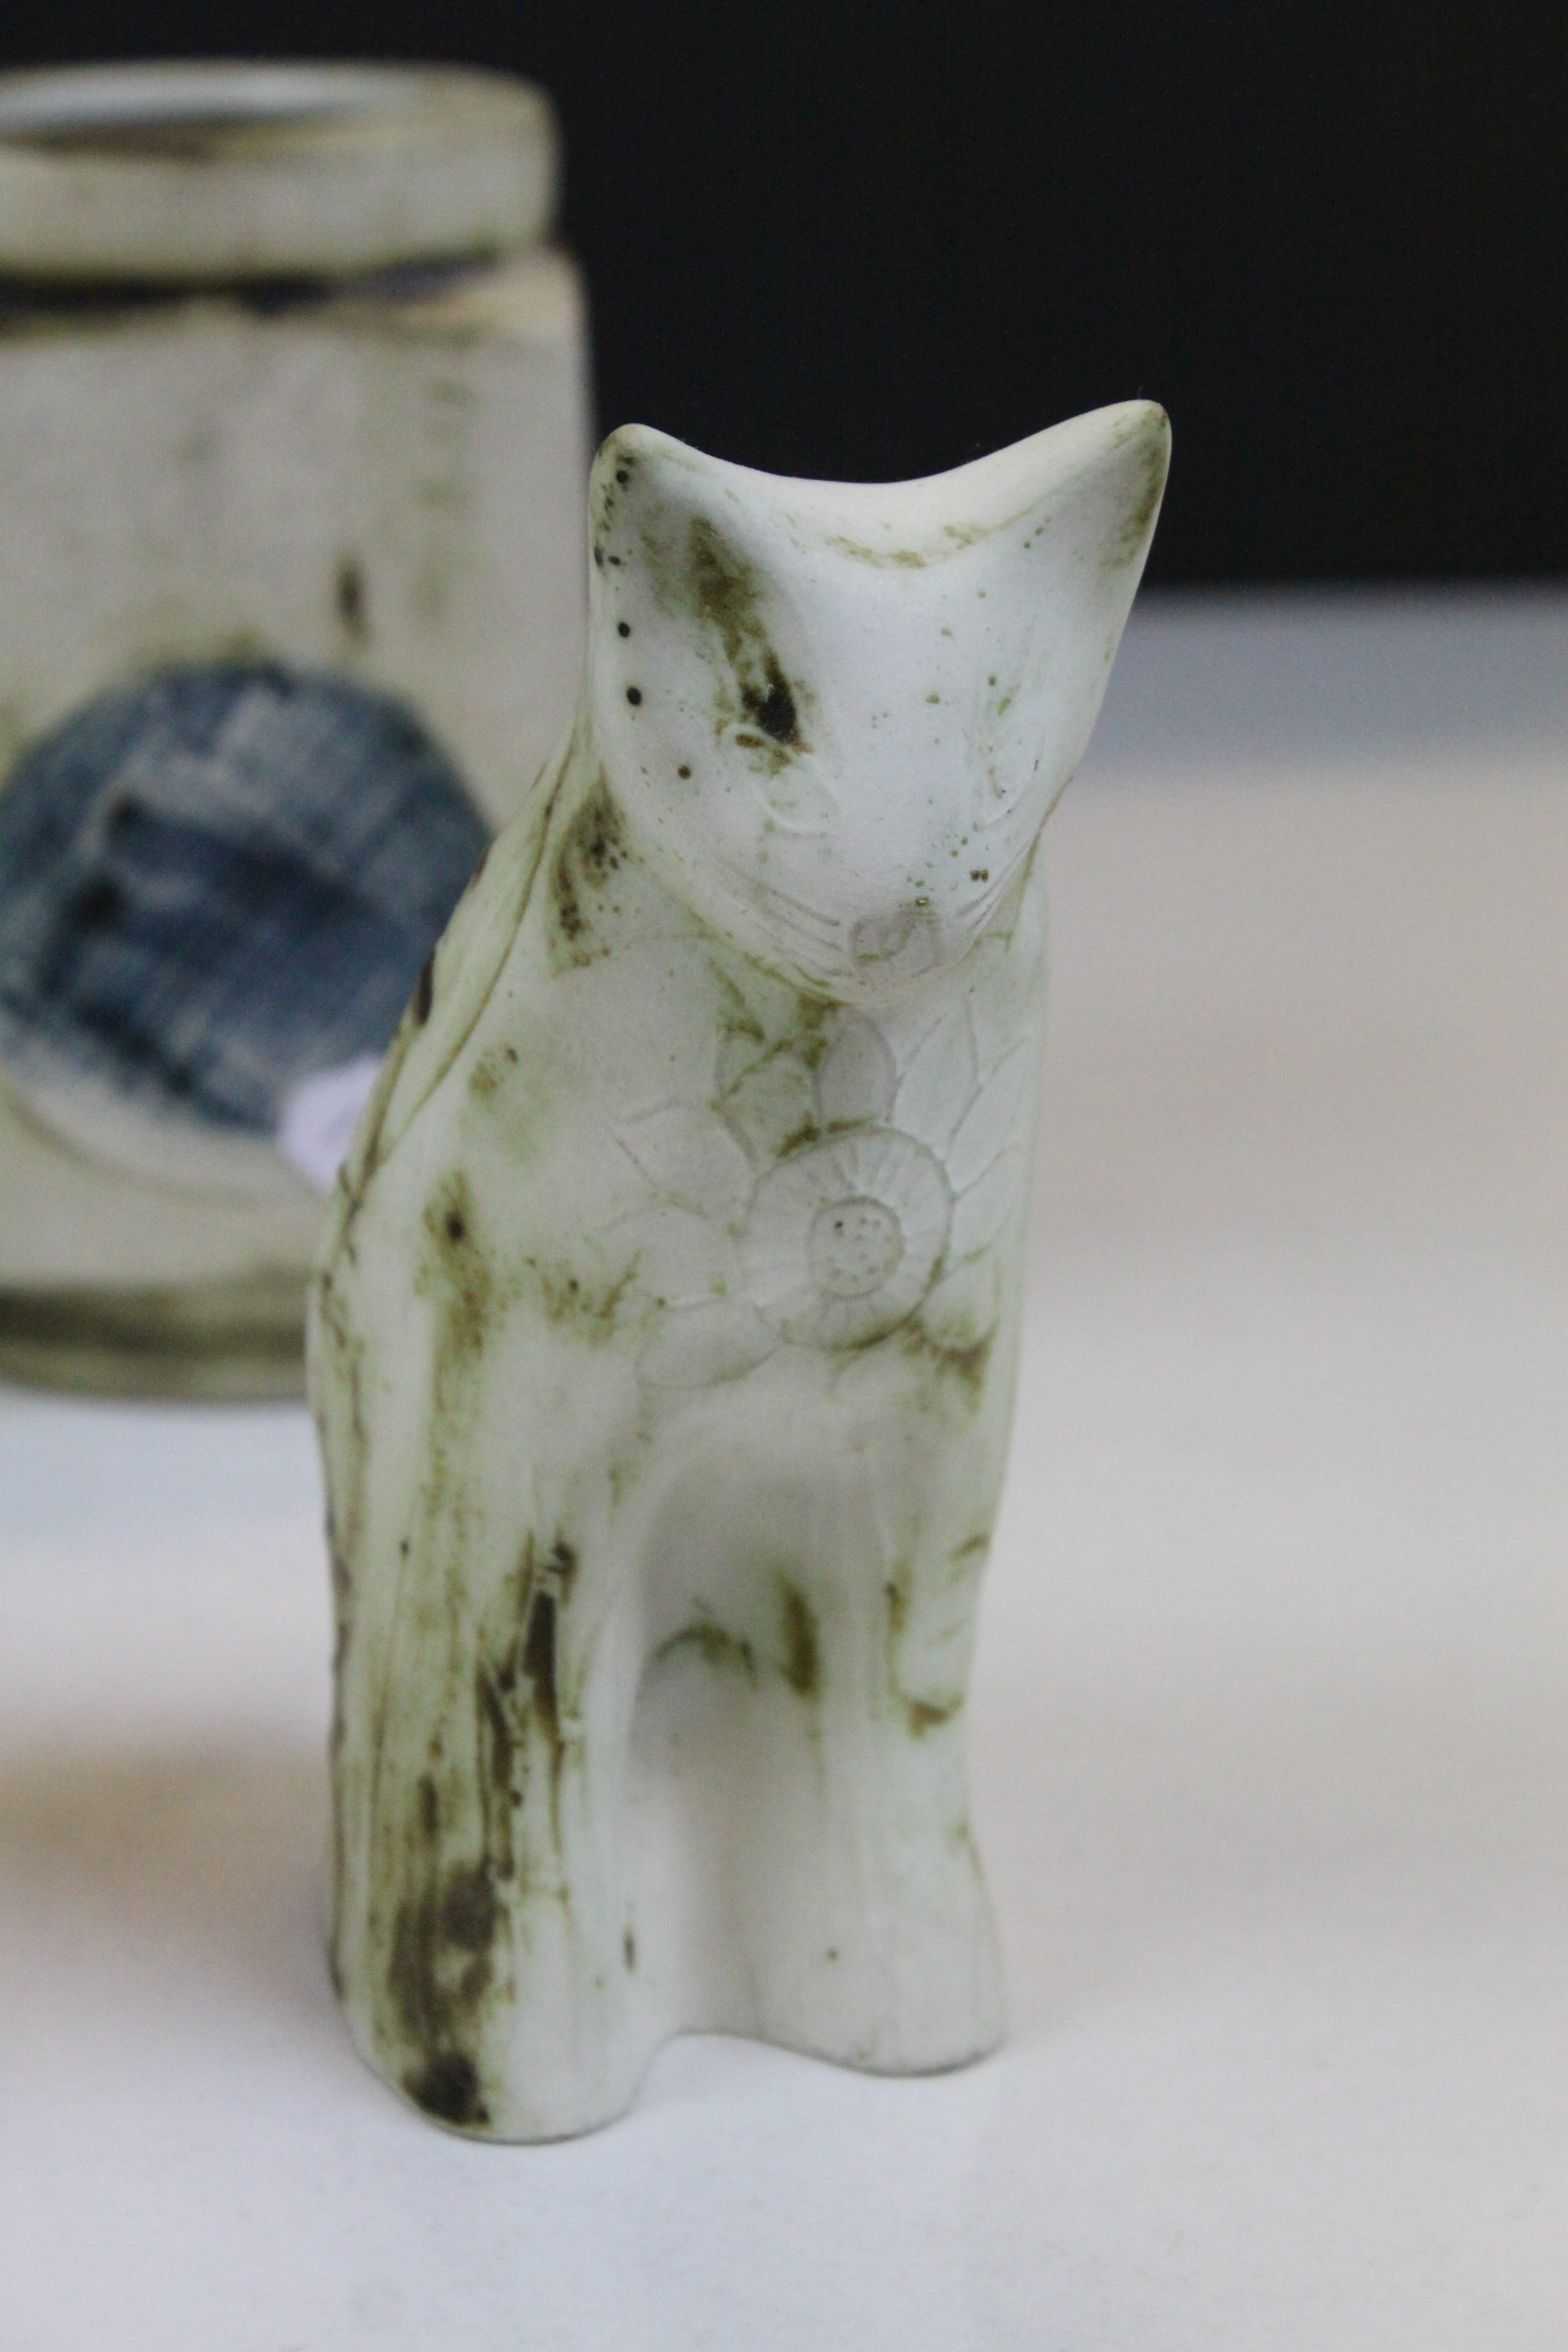 Pair of Carn Pottery seated Cats plus a Carn Pottery vase in Troika style with blue circle design - Image 3 of 6